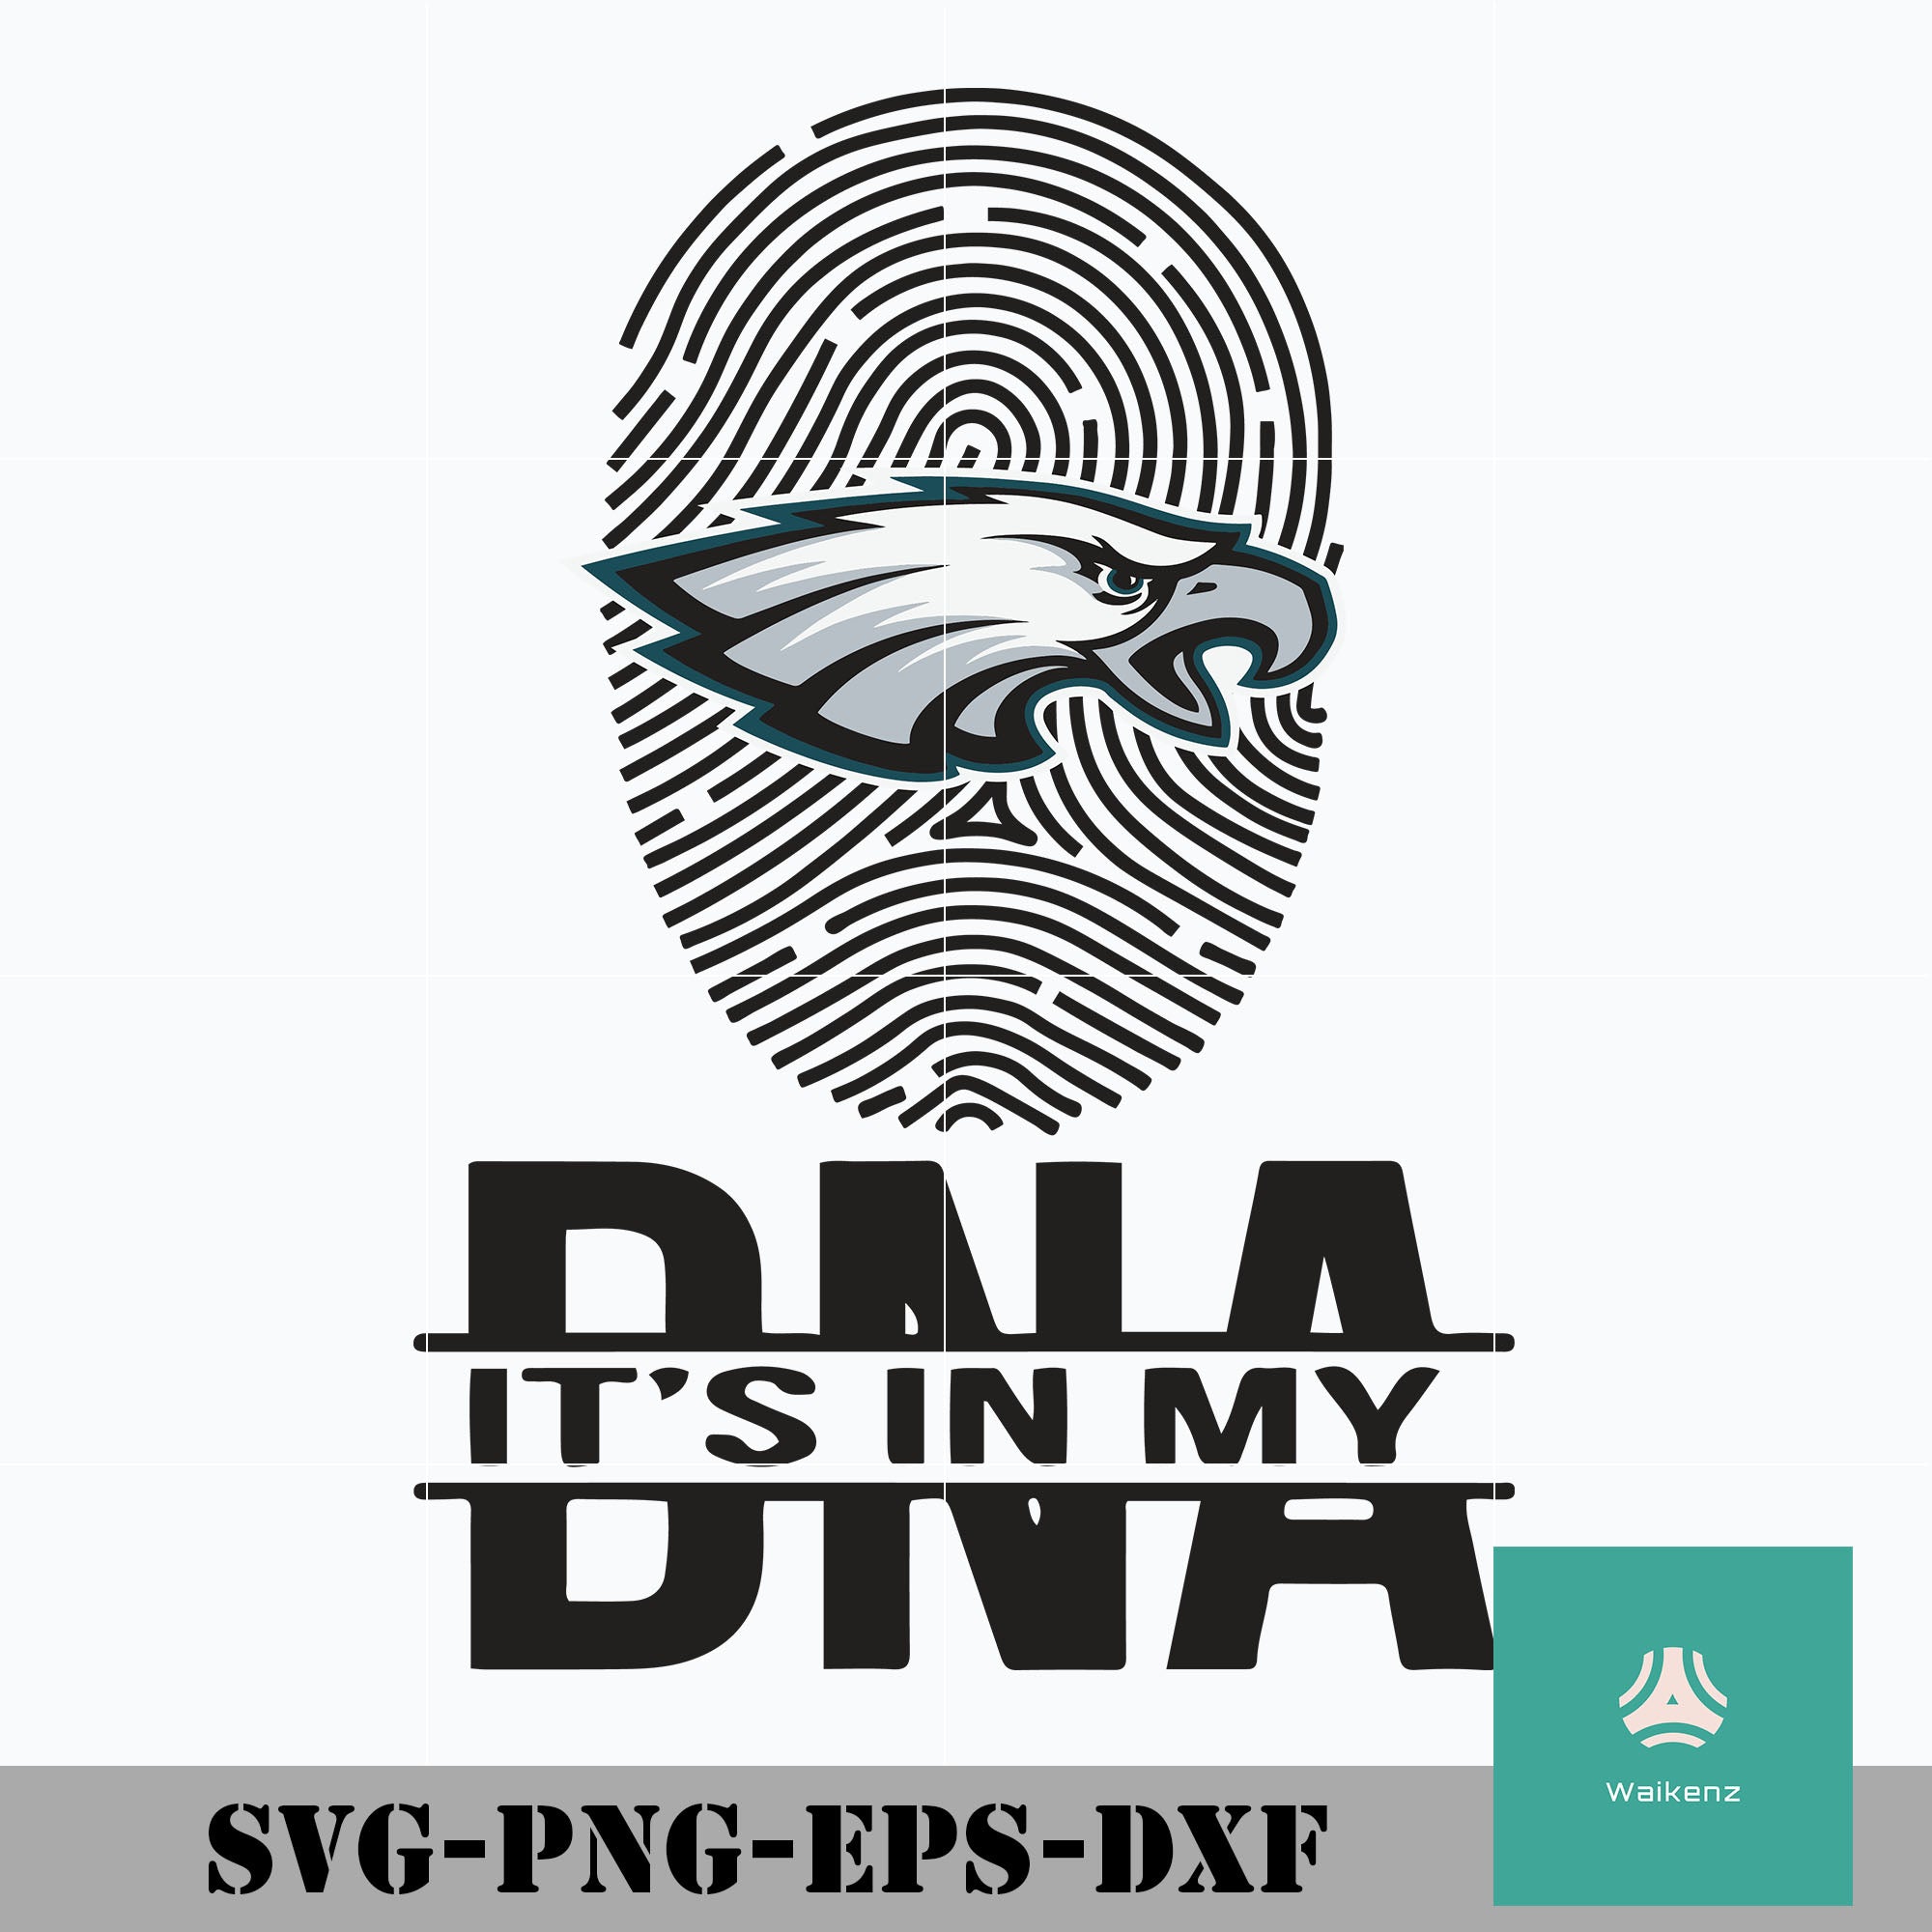 Download Eagles It Is In My Dna Svg Philadelphia Eagles Svg Eagles Svg Eagle Waikenz